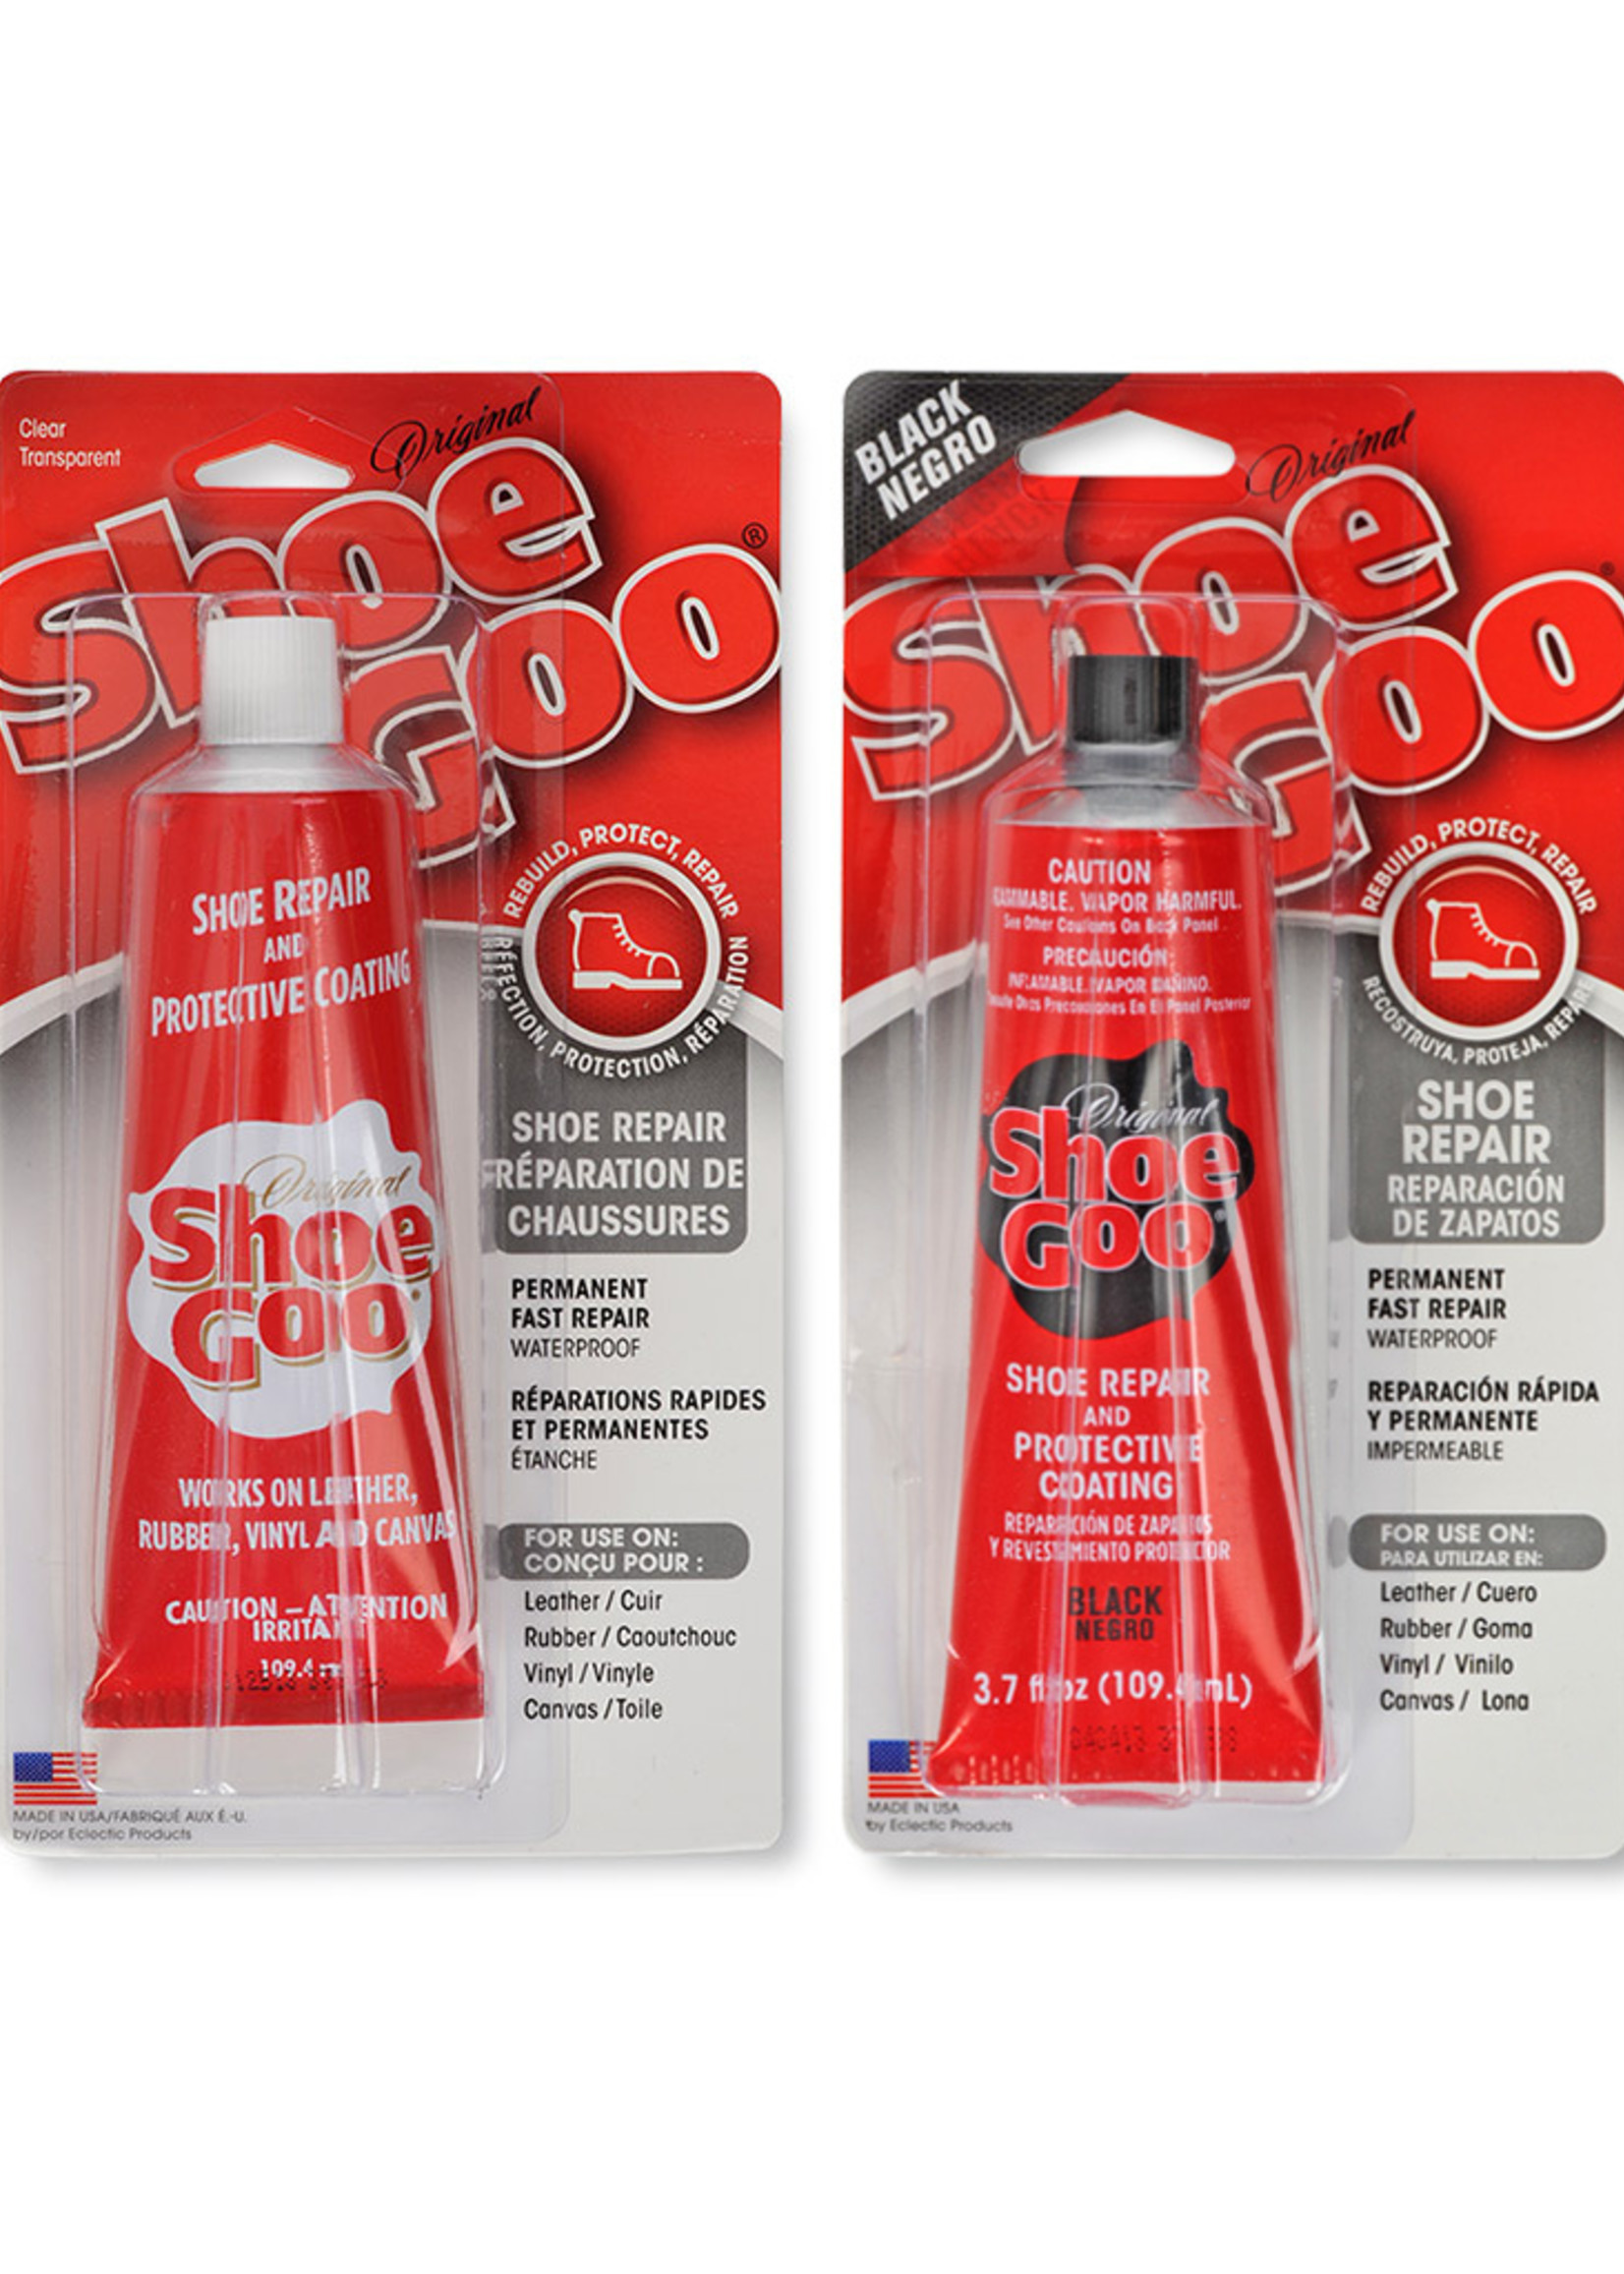 Shoe Goo 109.4 ml Mixed 2-Pack with 10% Discount - Crazy Dude